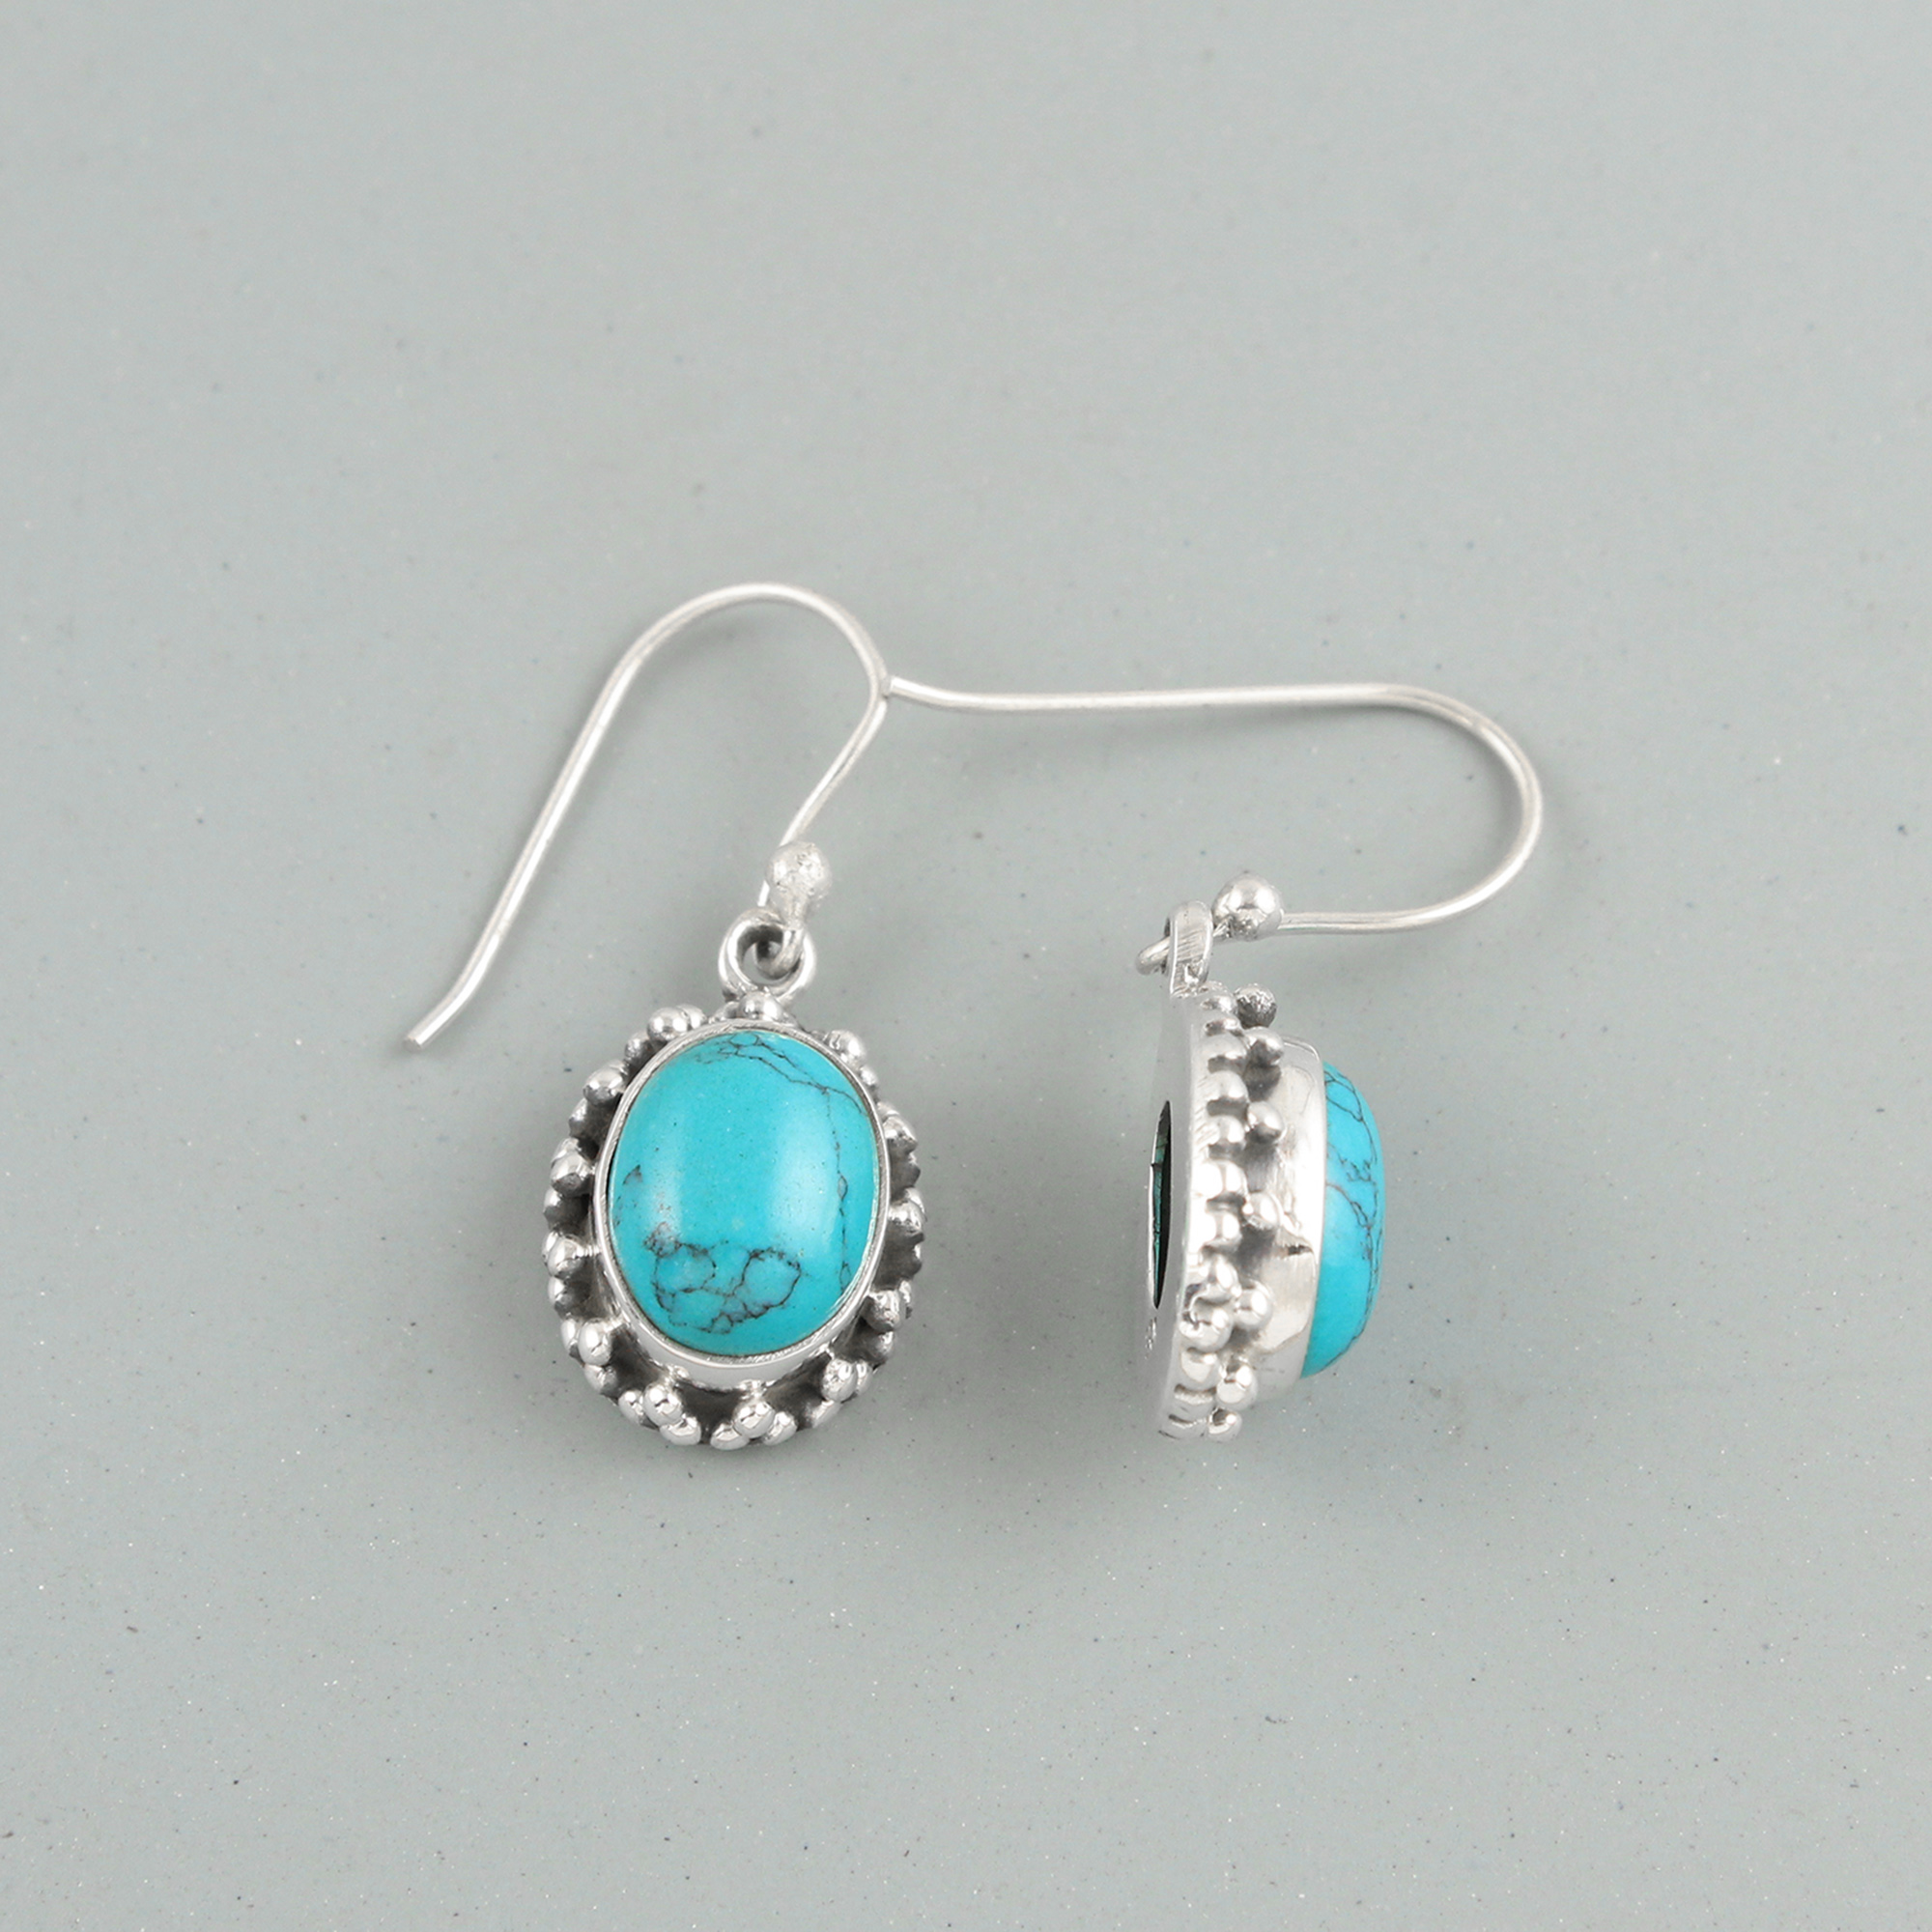 Wholesale Turquoise jewelry Suppliers | Turquoise Gemstone Jewelry ...